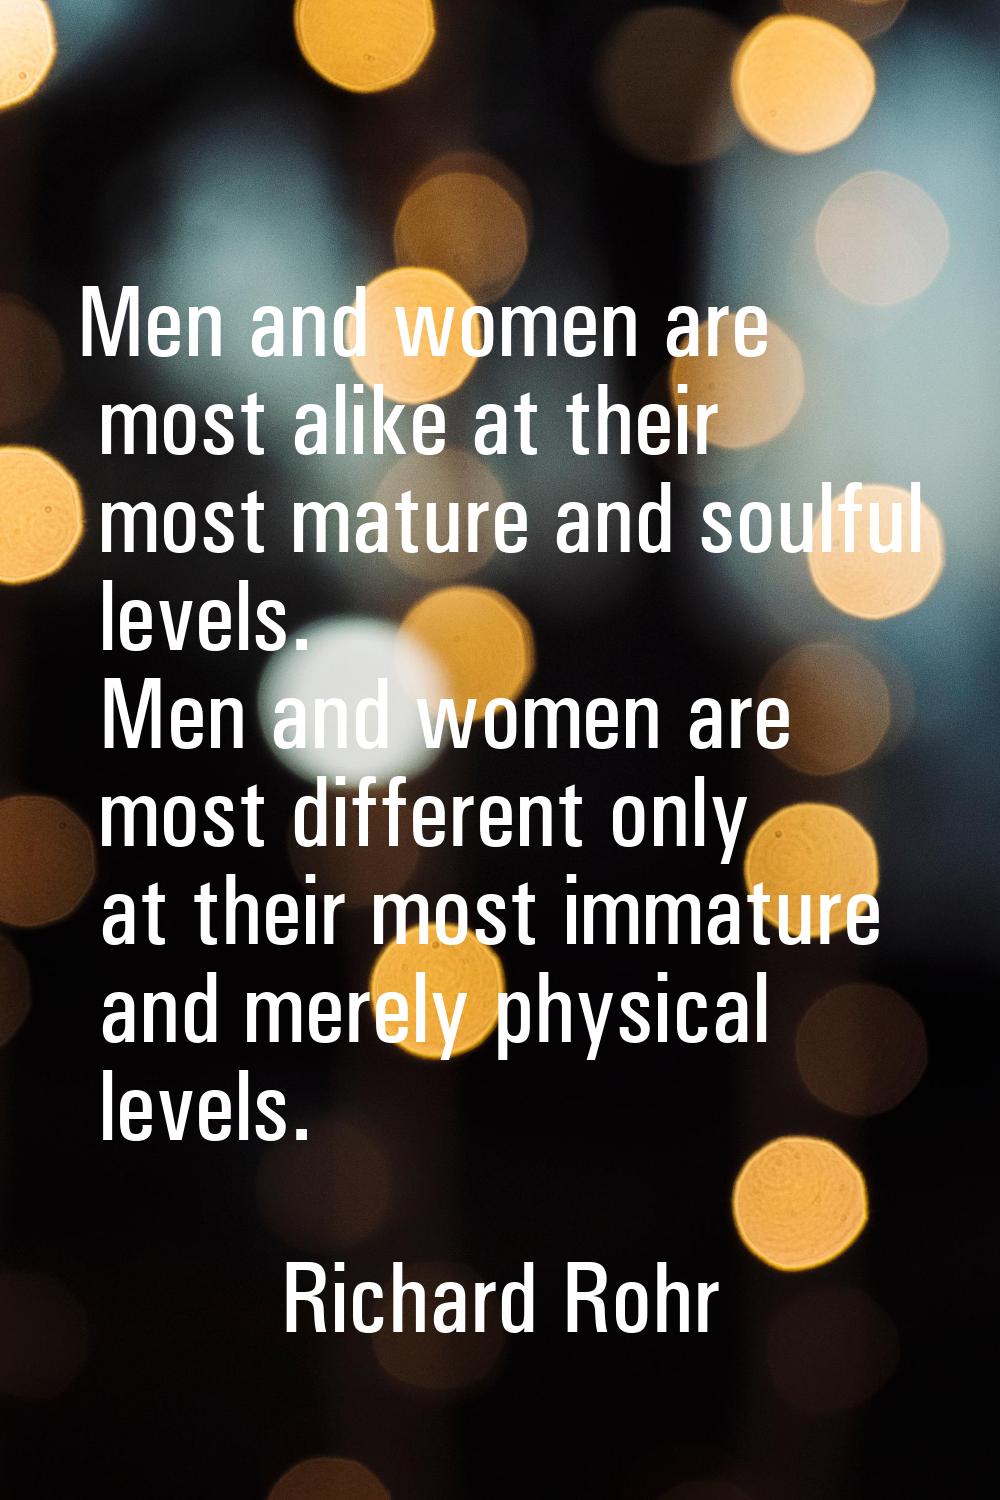 Men and women are most alike at their most mature and soulful levels. Men and women are most differ